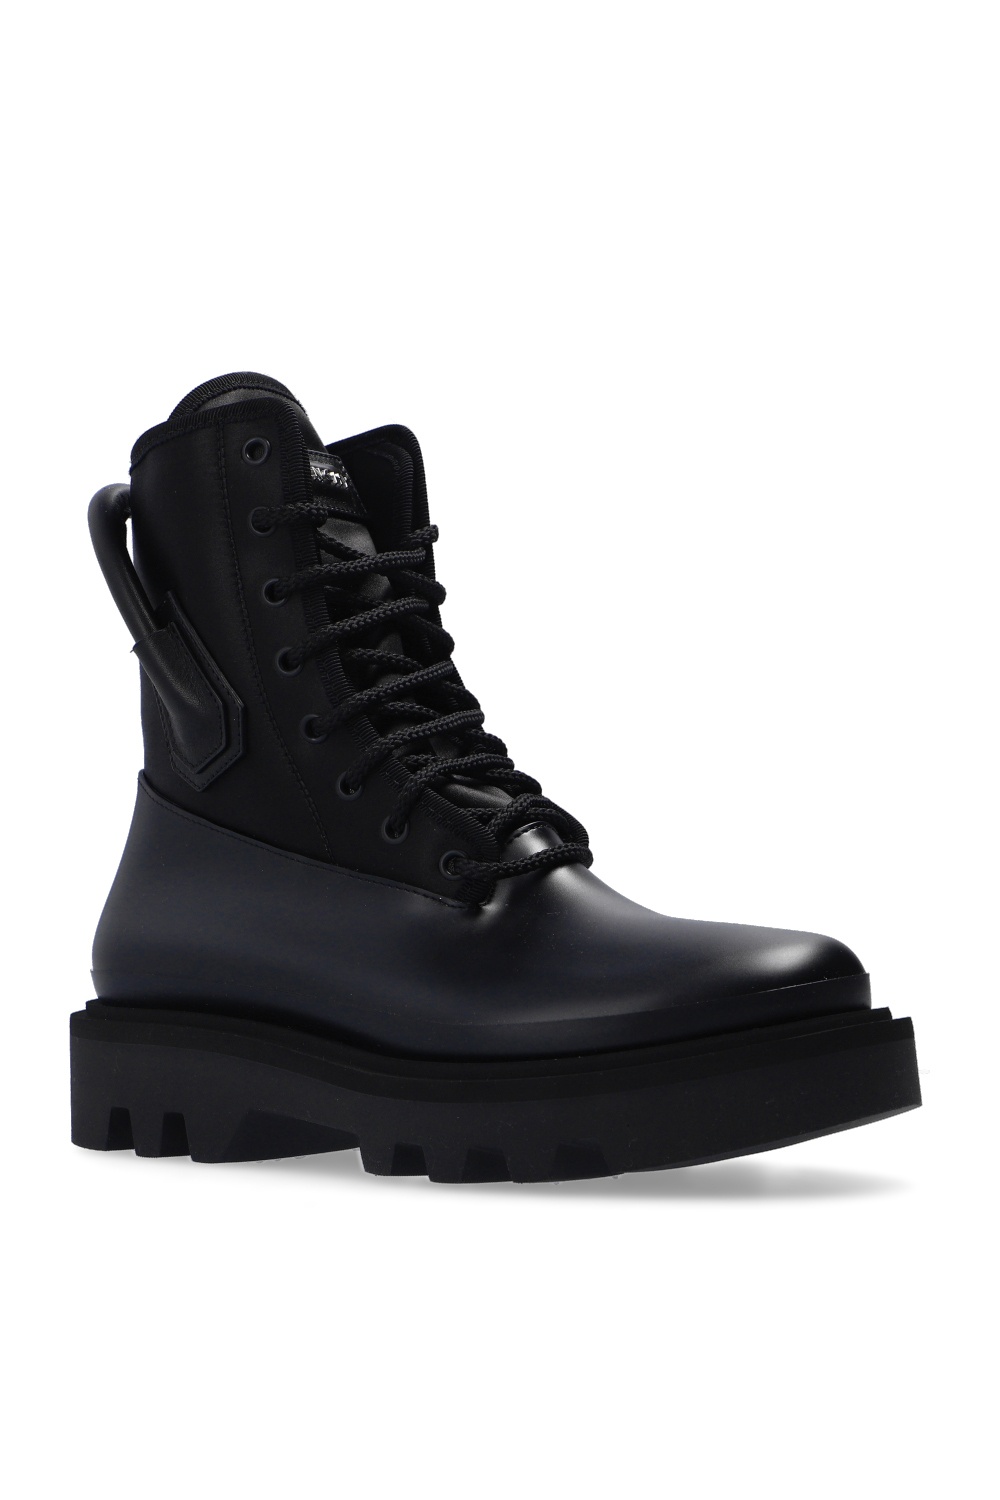 givenchy kids boots